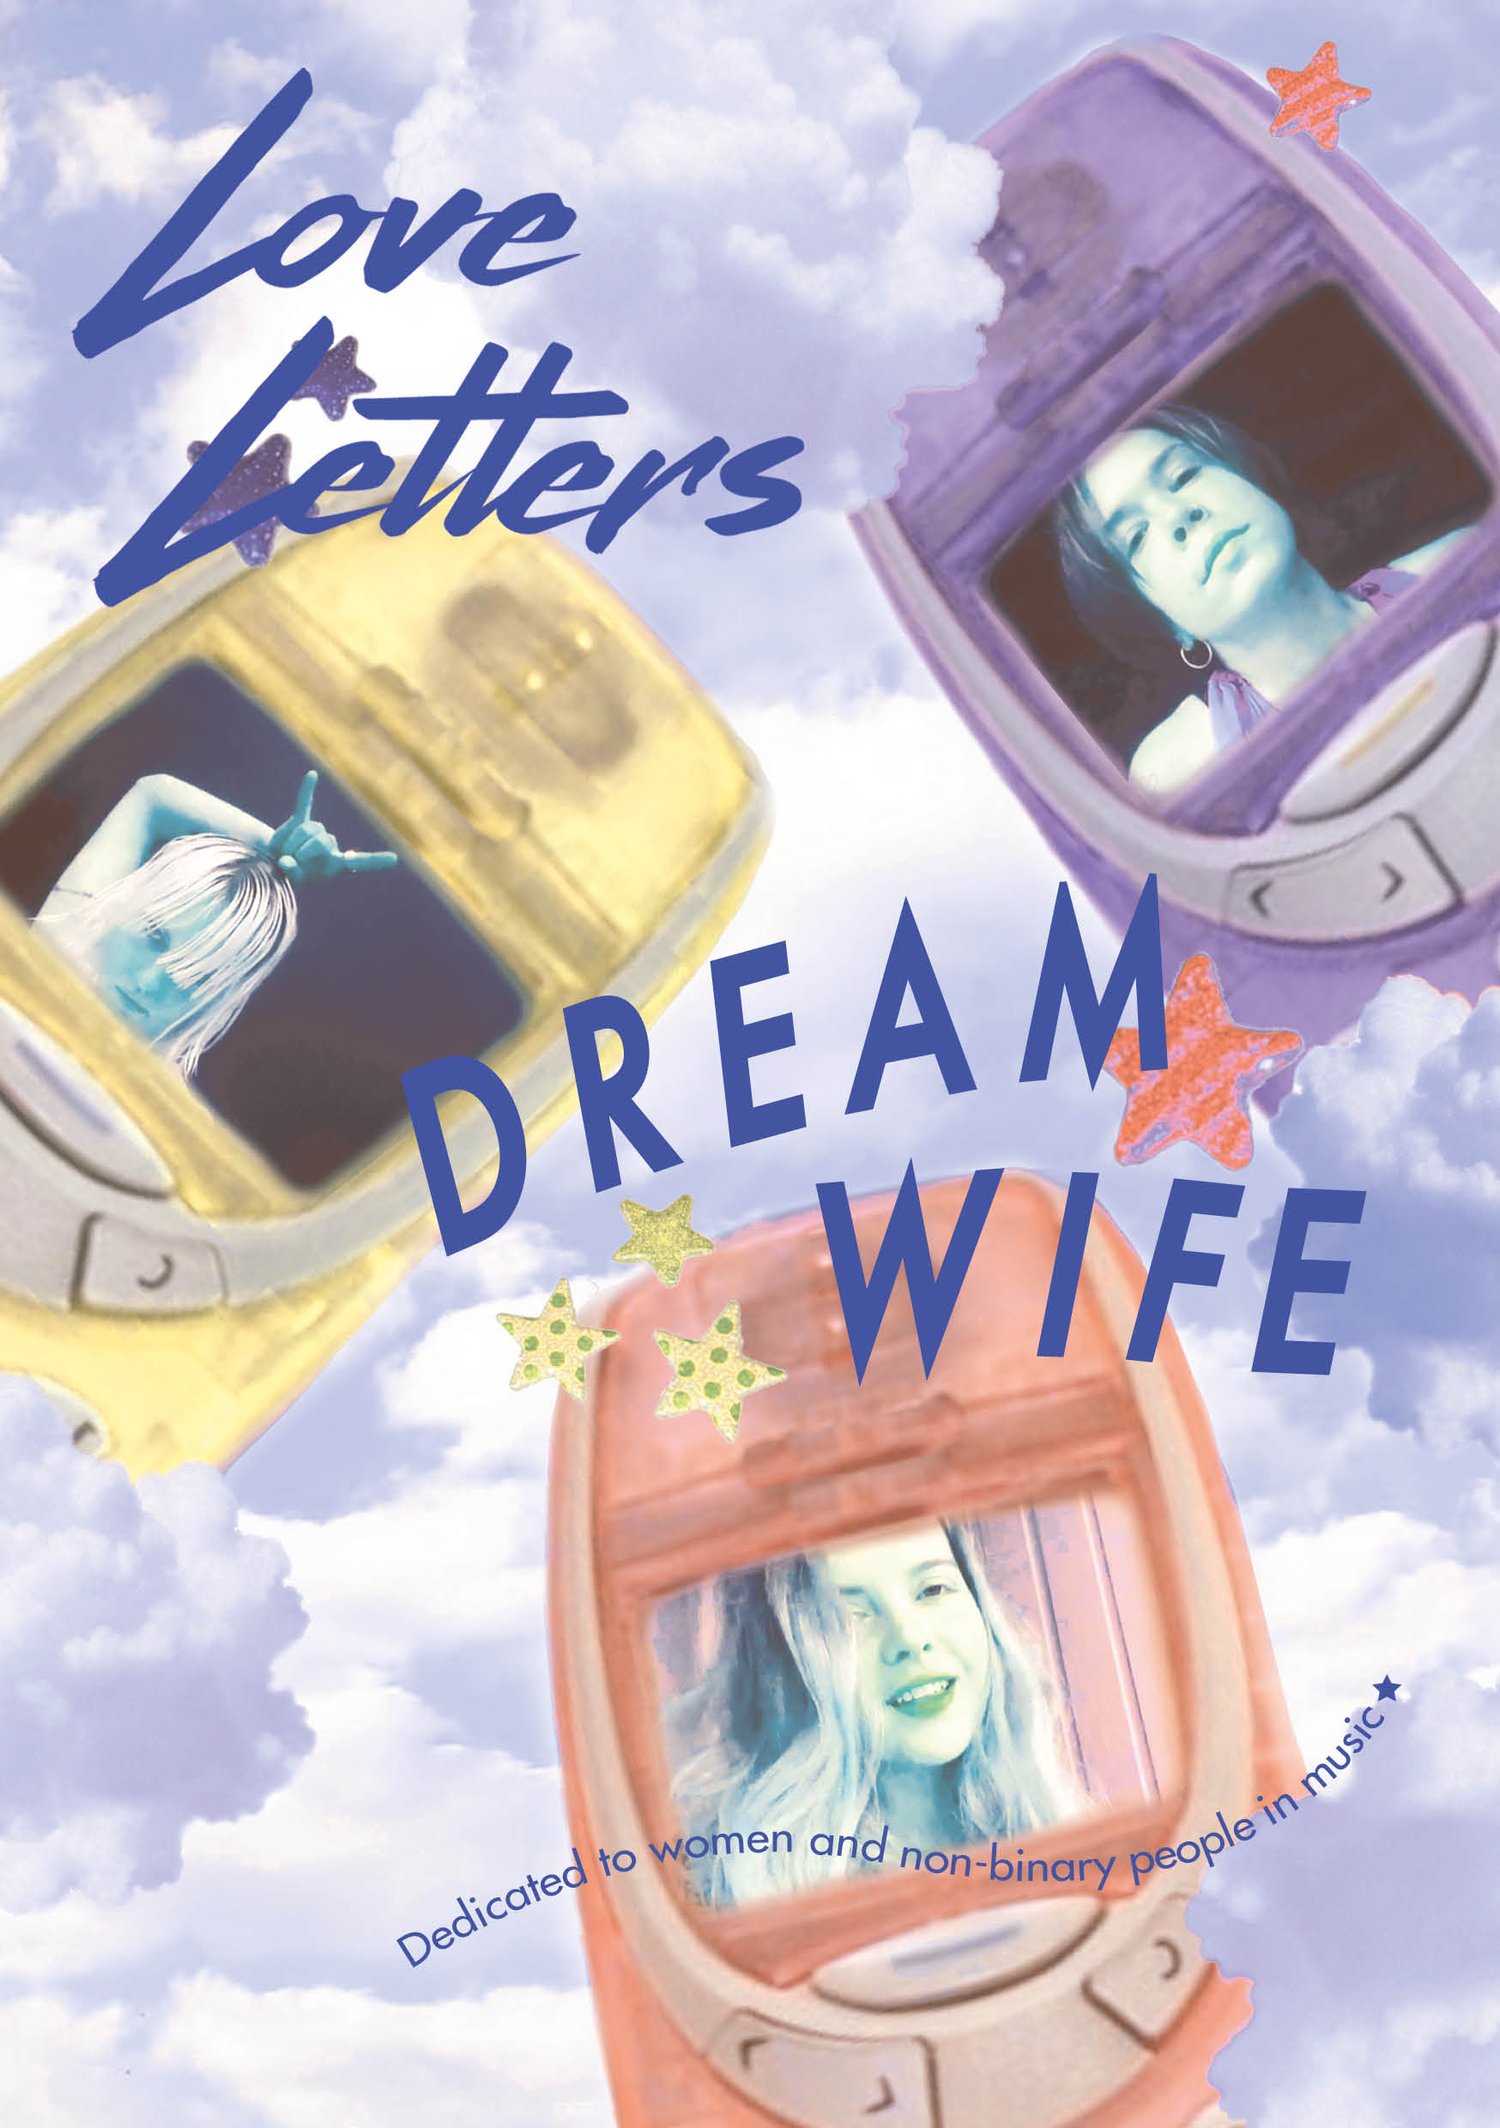 Love Letters Issue 3 - Dream Wife